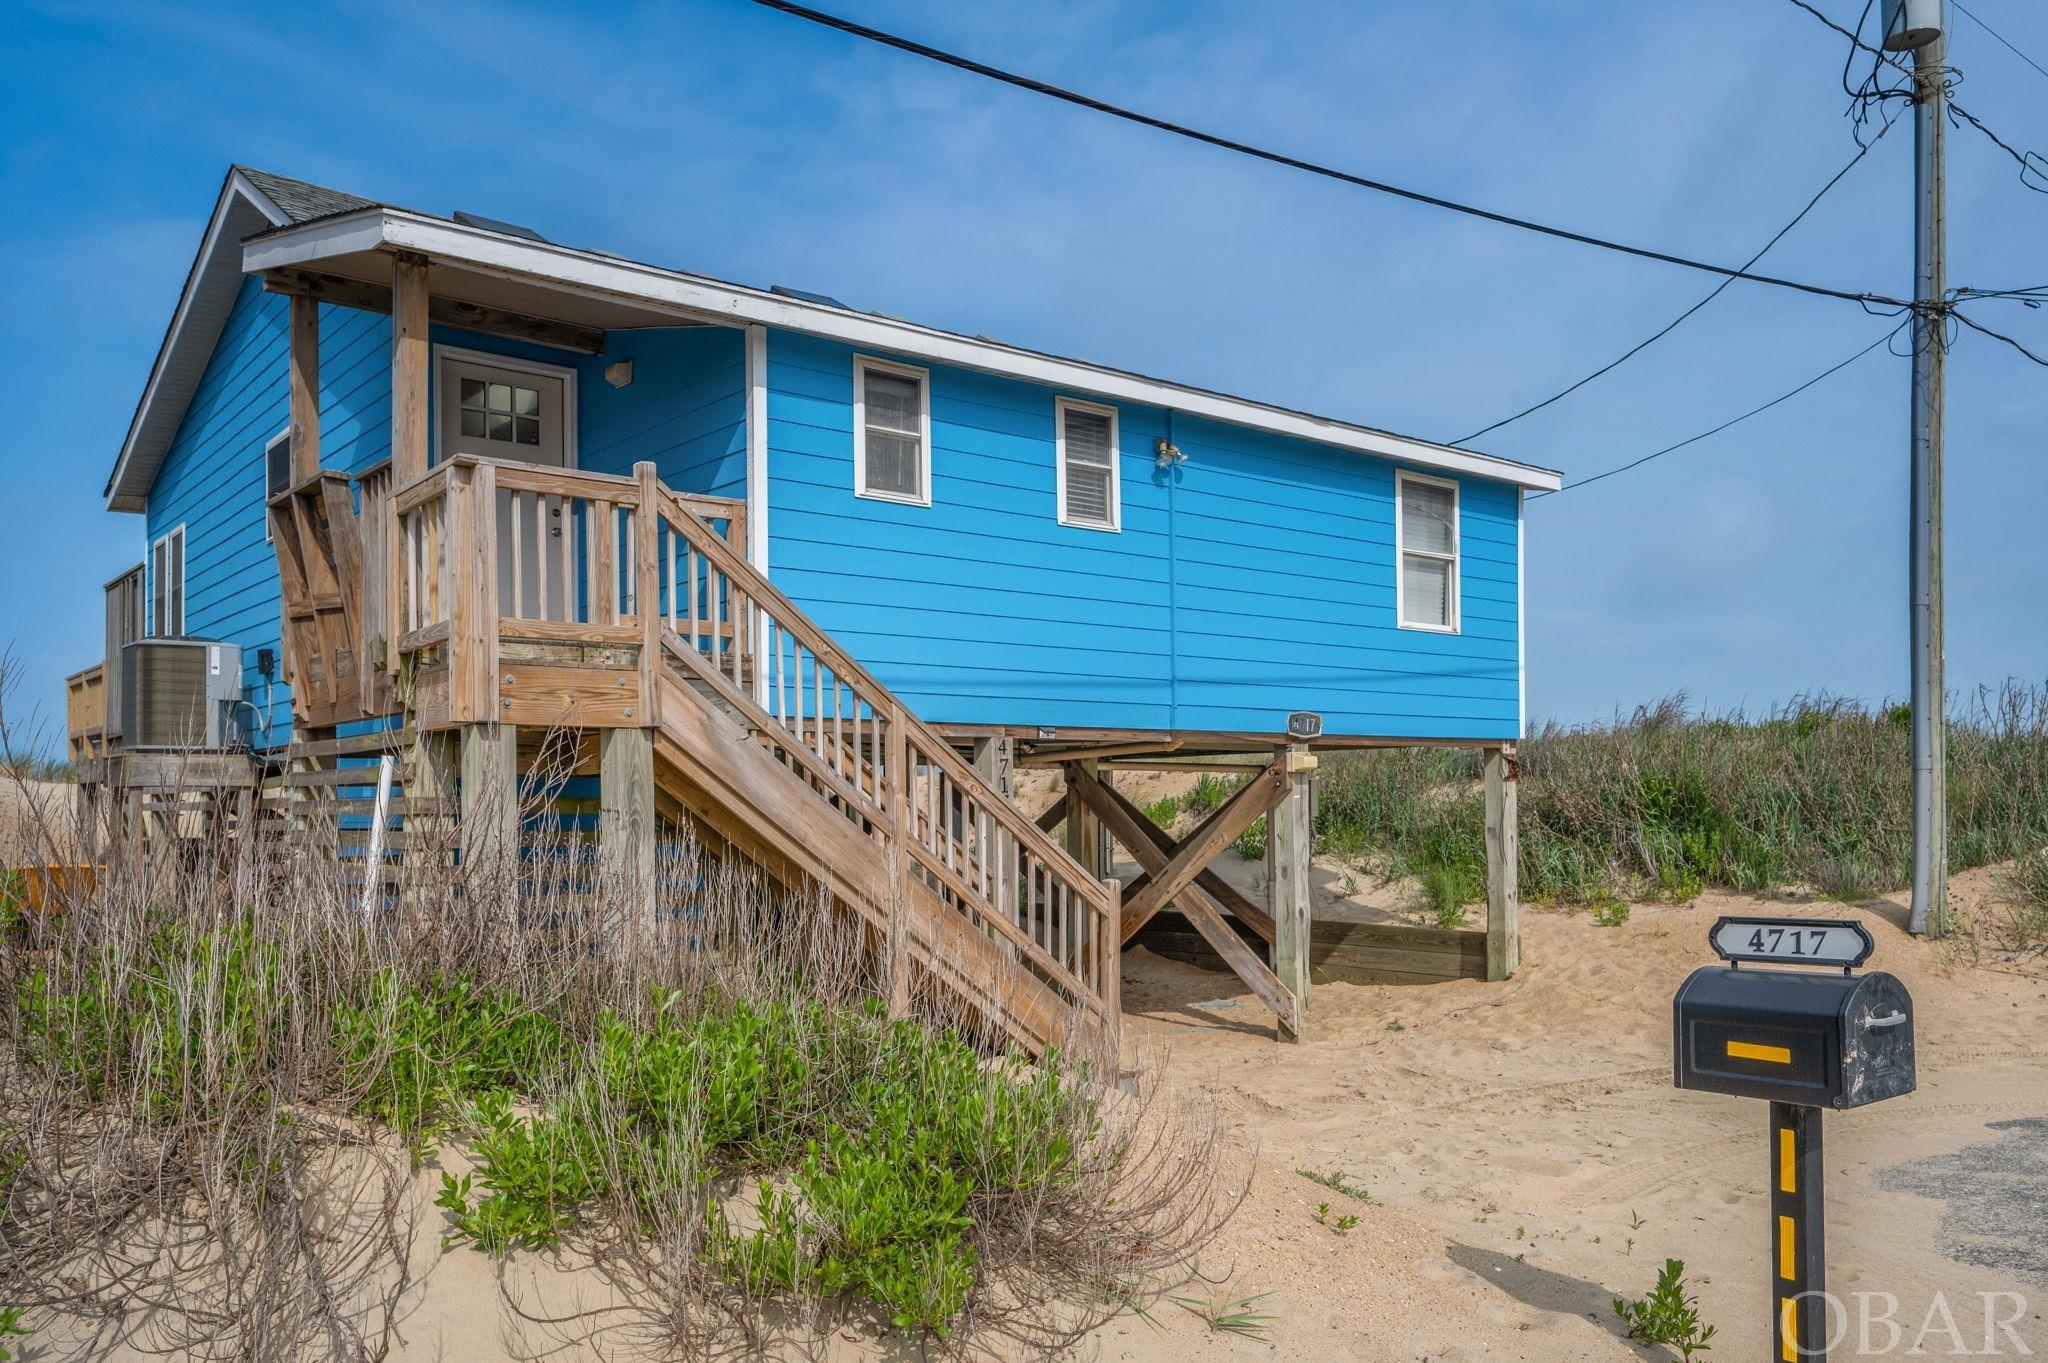 This oceanfront property is a three-bedroom, two-bathroom home offering a tranquil and idyllic setting and stunning ocean views. The property was completely remodeled in 2004, including new roof, pilings and siding on the outside, as well as everything on the inside. This is a solidly built oceanfront home that was originally a second home and has never been a rental. This beach getaway is ideal as a second home or income producing property. (Rental projection in Associated Documents estimates upward of $108,000 advertised rental income.) Upon entering, you are greeted with a wide open floor plan with two large skylights inviting natural light to flood the space, and a large picture window which provides breathtaking views of the ocean. The light-toned hardwood floors run throughout the house.  There is also a half-glass door, with internal mini blinds, leading out to the oceanfront deck.  Stepping outside, the home reveals its true gem—an expansive oceanfront laid out before you. The crashing waves and salty breezes provide a constant reminder of the home's unparalleled location. The spacious outdoor deck offers a wonderful spot to sunbathe, entertain, watch a stunning sunrise over the ocean, or dine al fresco. The outdoor shower is adjacent. The kitchen area offers wood cabinetry in a honey tone, a granite counter, dishwasher, newer fridge, and a stove/oven with microwave. The cottage has three bedrooms. The oceanfront room boasts large windows that showcase stunning ocean vistas, providing a serene backdrop for relaxation. The other bedrooms are on the south and west side of the layout. The home has two full bathrooms each with glass door showers, commodes, and vanities.  One bathroom can be shut off from the main living area to create private accommodations. This is a charming coastal retreat with spectacular ocean views and a desirable location. Close to the Kitty Hawk Pier, many local restaurants, retail stores, and grocery shopping, this prime location proves to be one of the most convenient spots in Kitty Hawk. The property is being sold As Advertised.